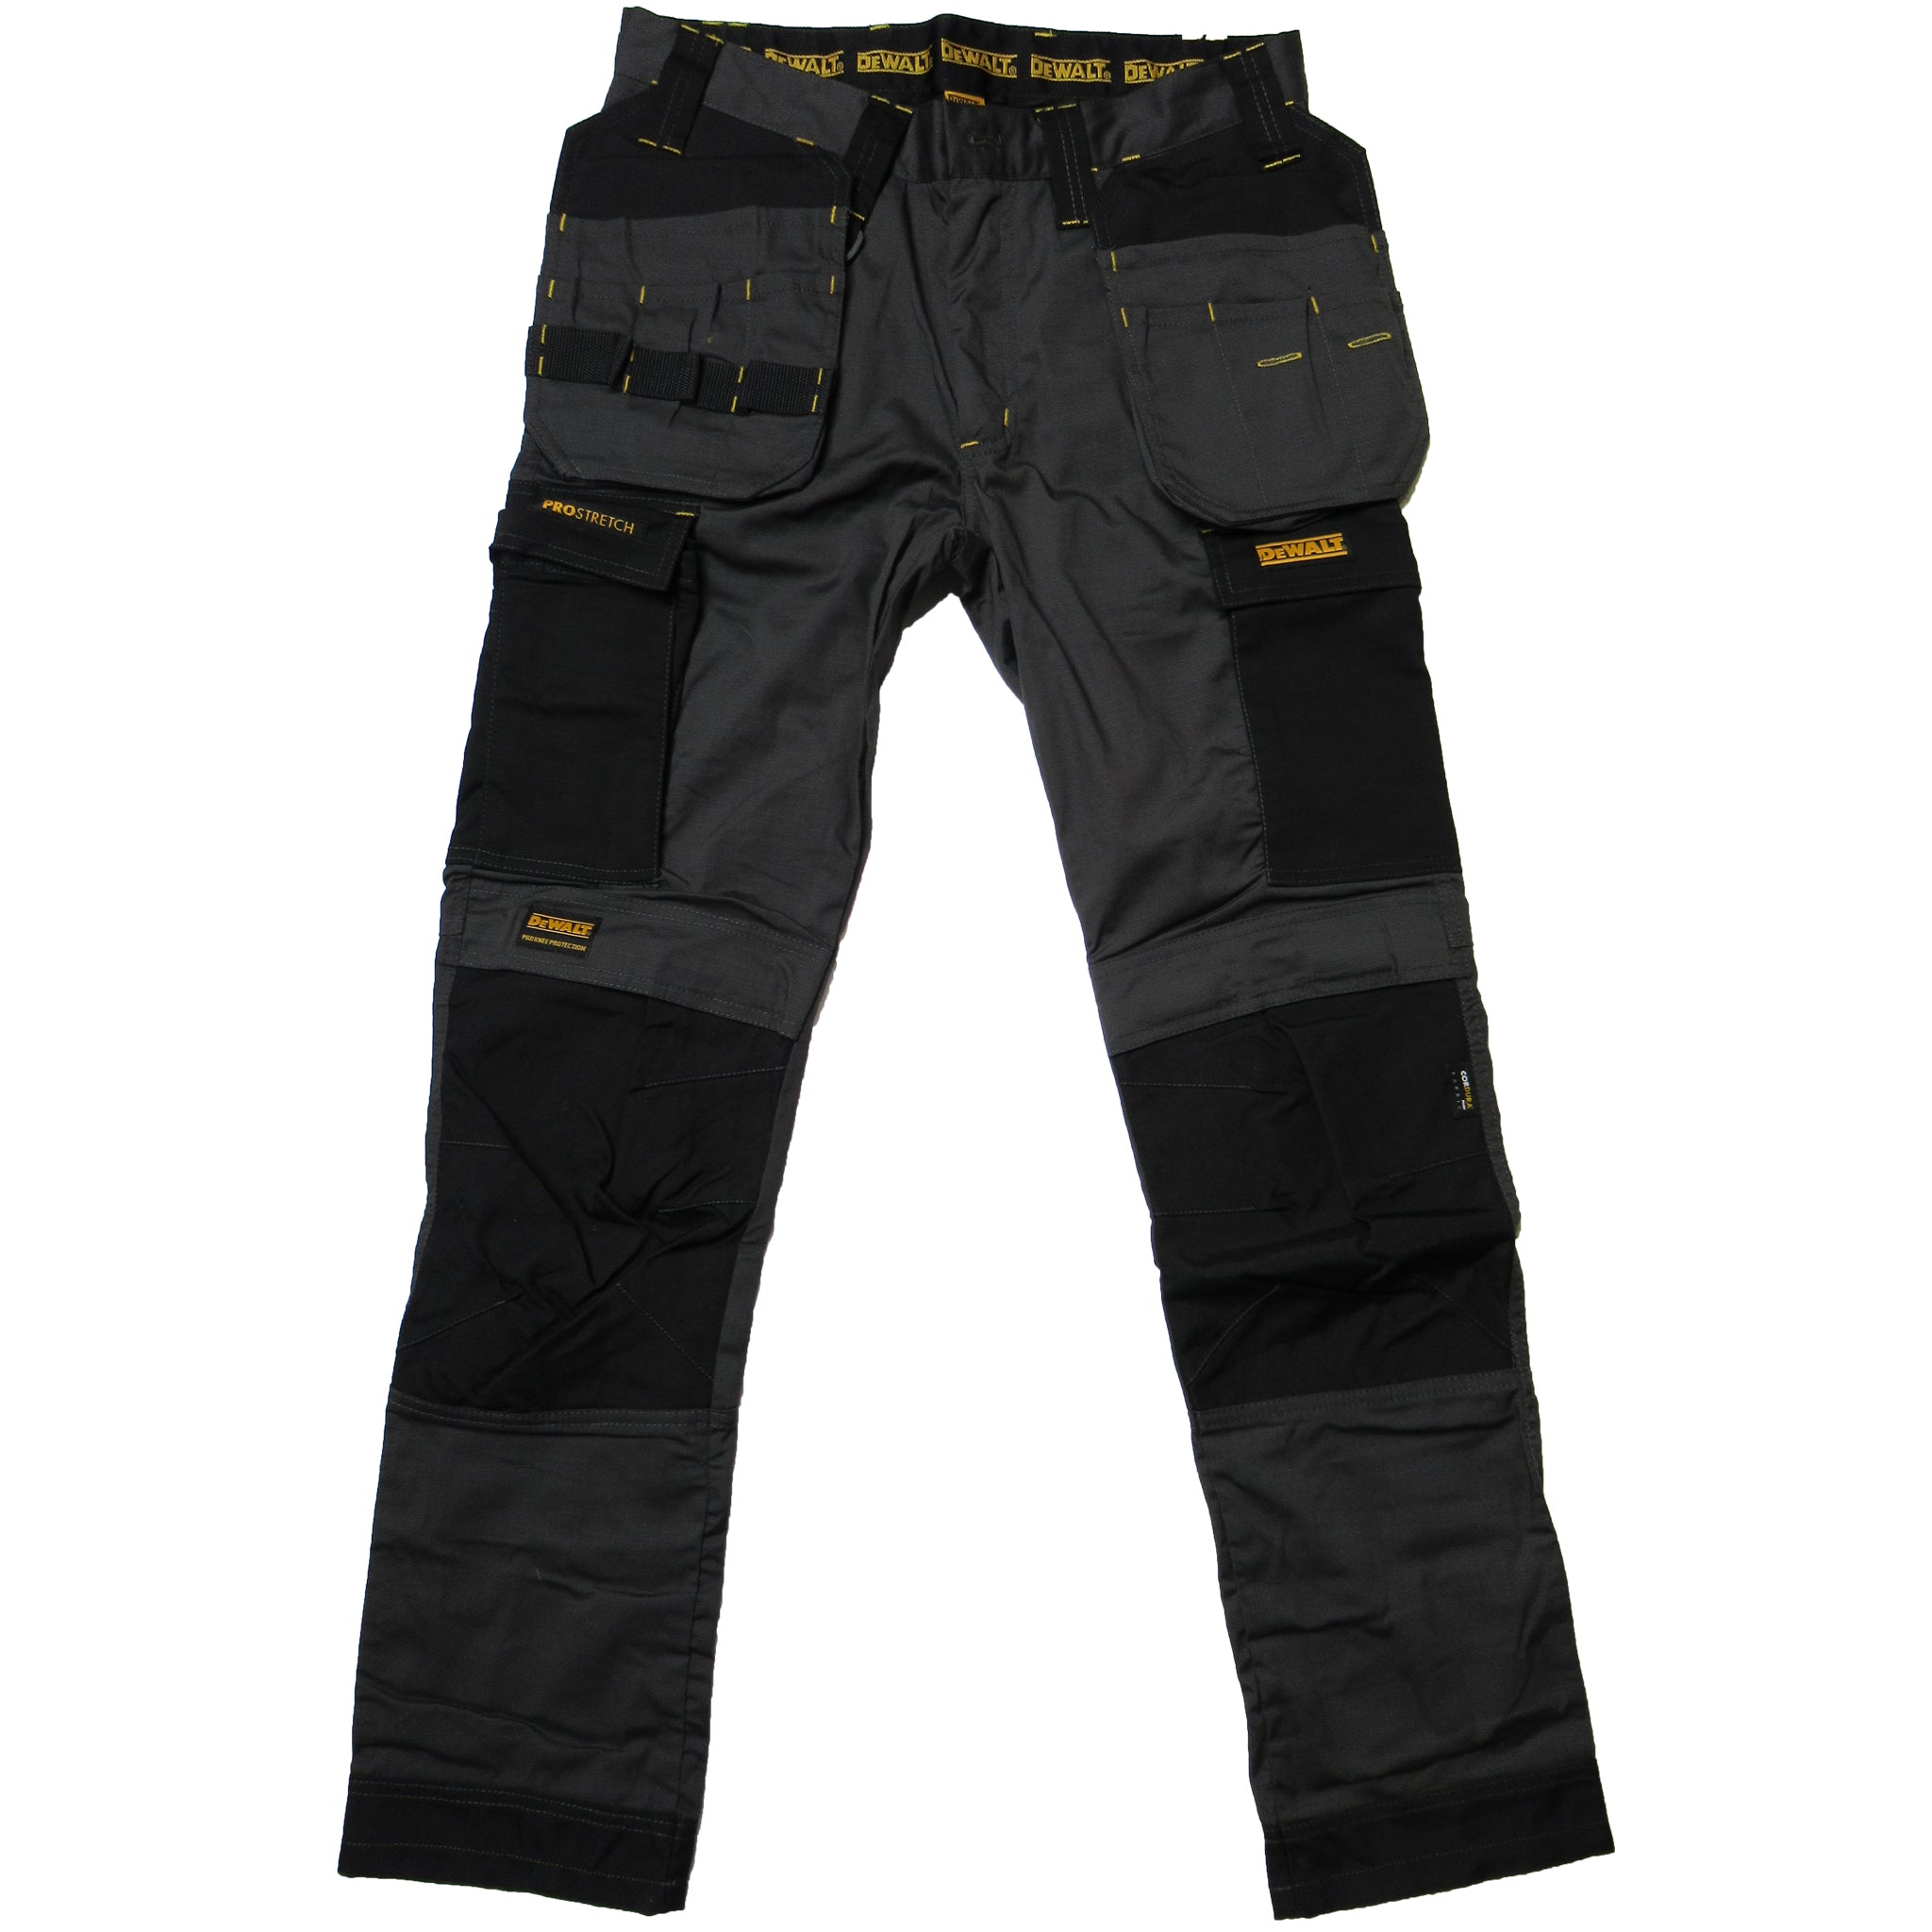 DEWALT Men's DXWW50085 Barstow DWR Work Pants – That Shoe Store and More